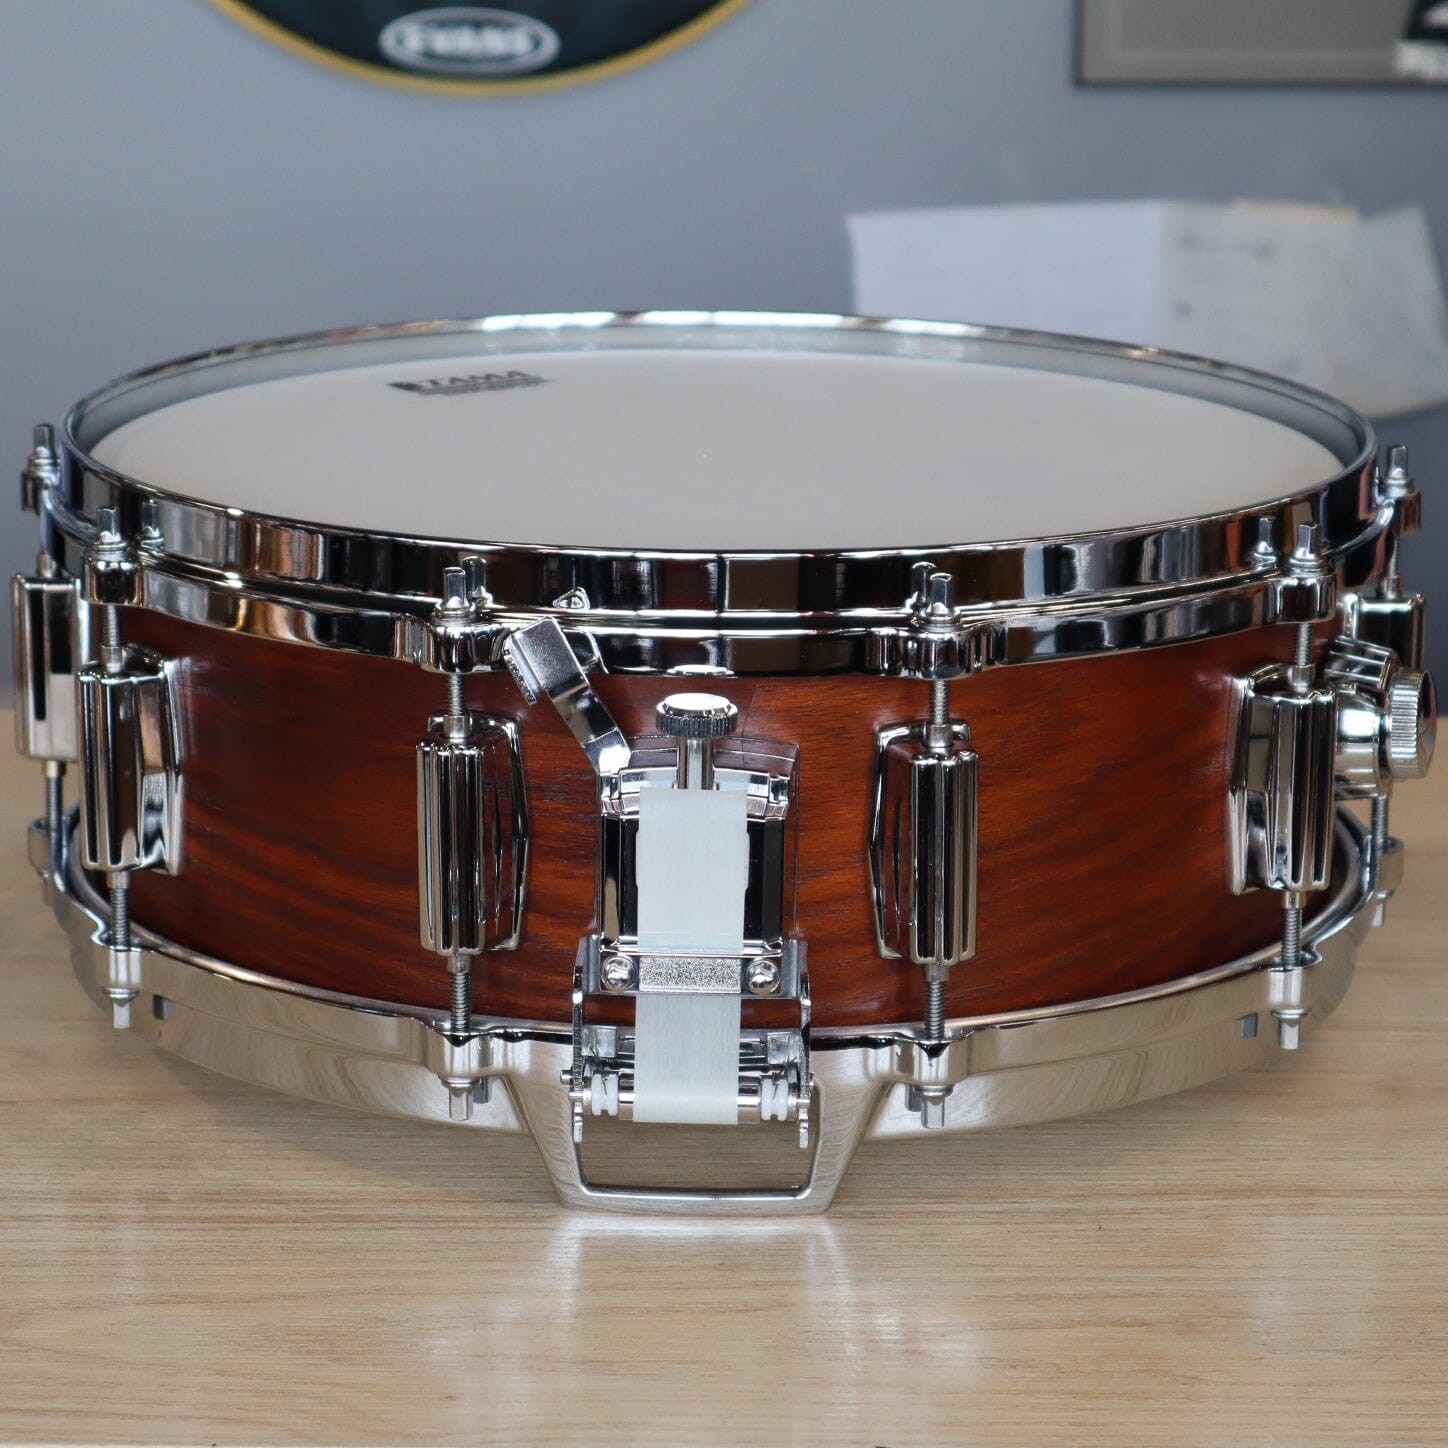 Tama 14x5" 50th Limited Edition Mastercraft Rosewood Reissue Snare Drum (RW255) NEW SNARE DRUMS Tama 